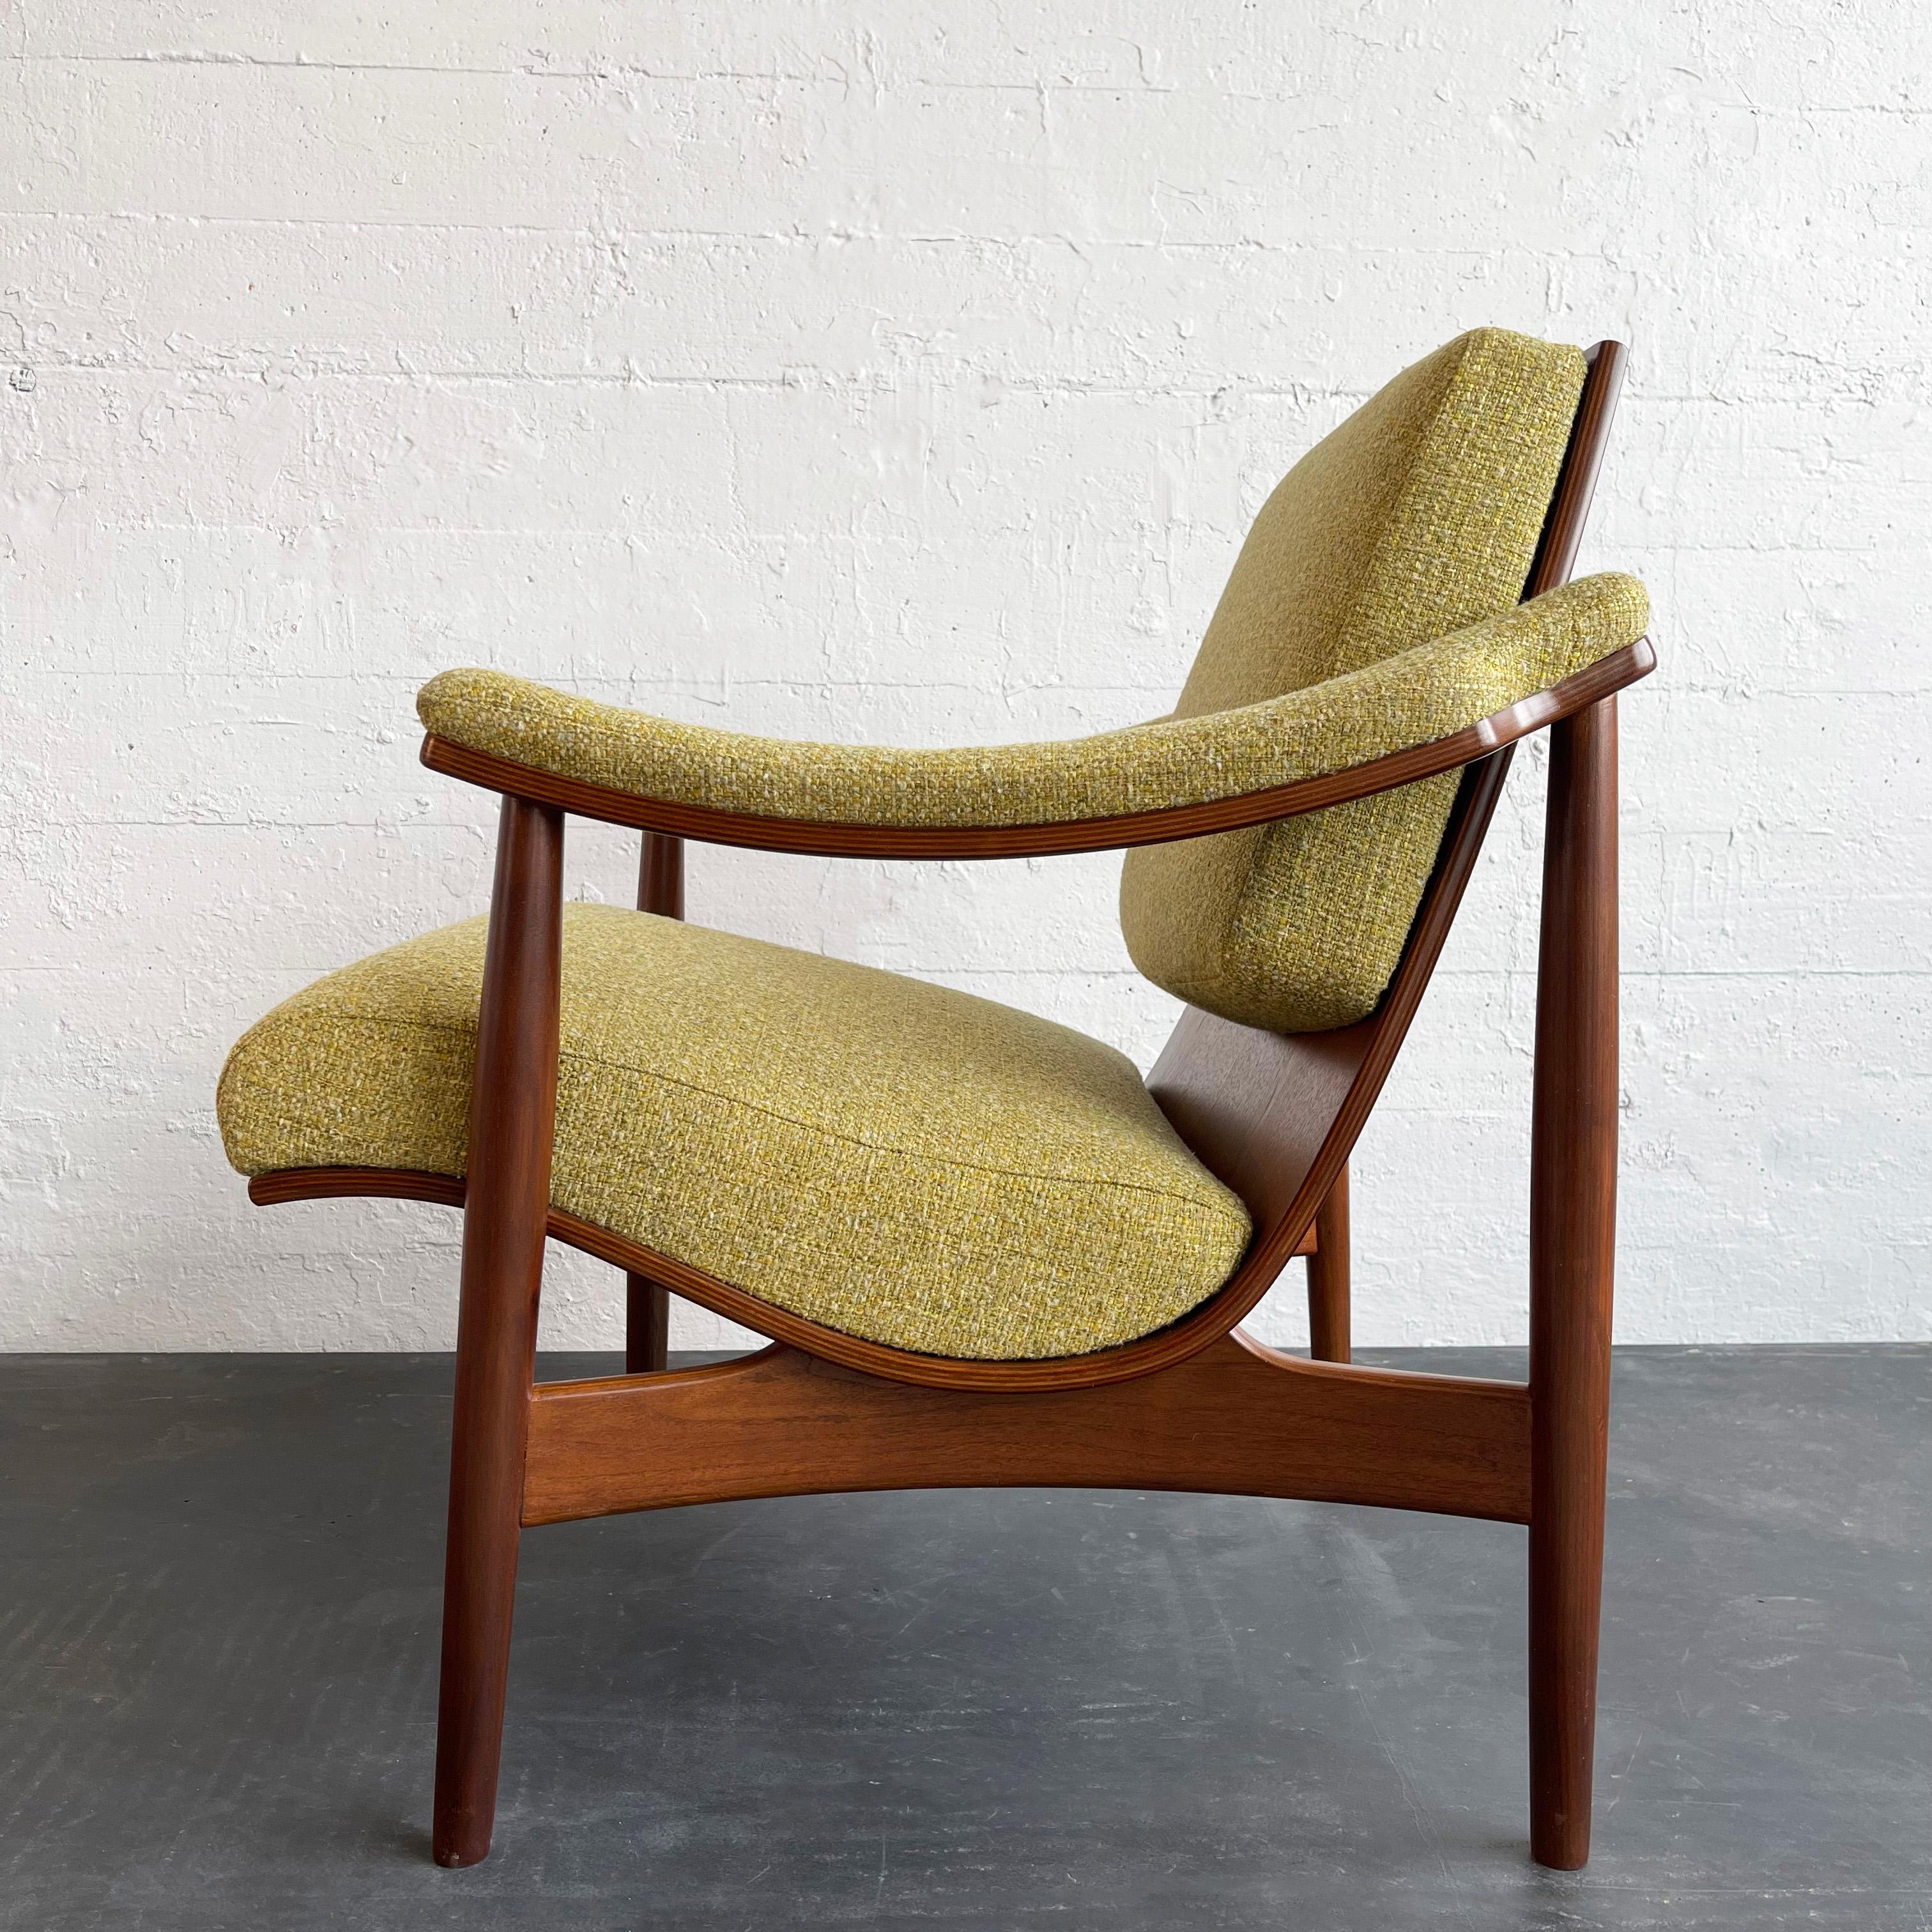 20th Century Mid-Century Modern Upholstered Scoop Bentwood Armchair By Thonet For Sale